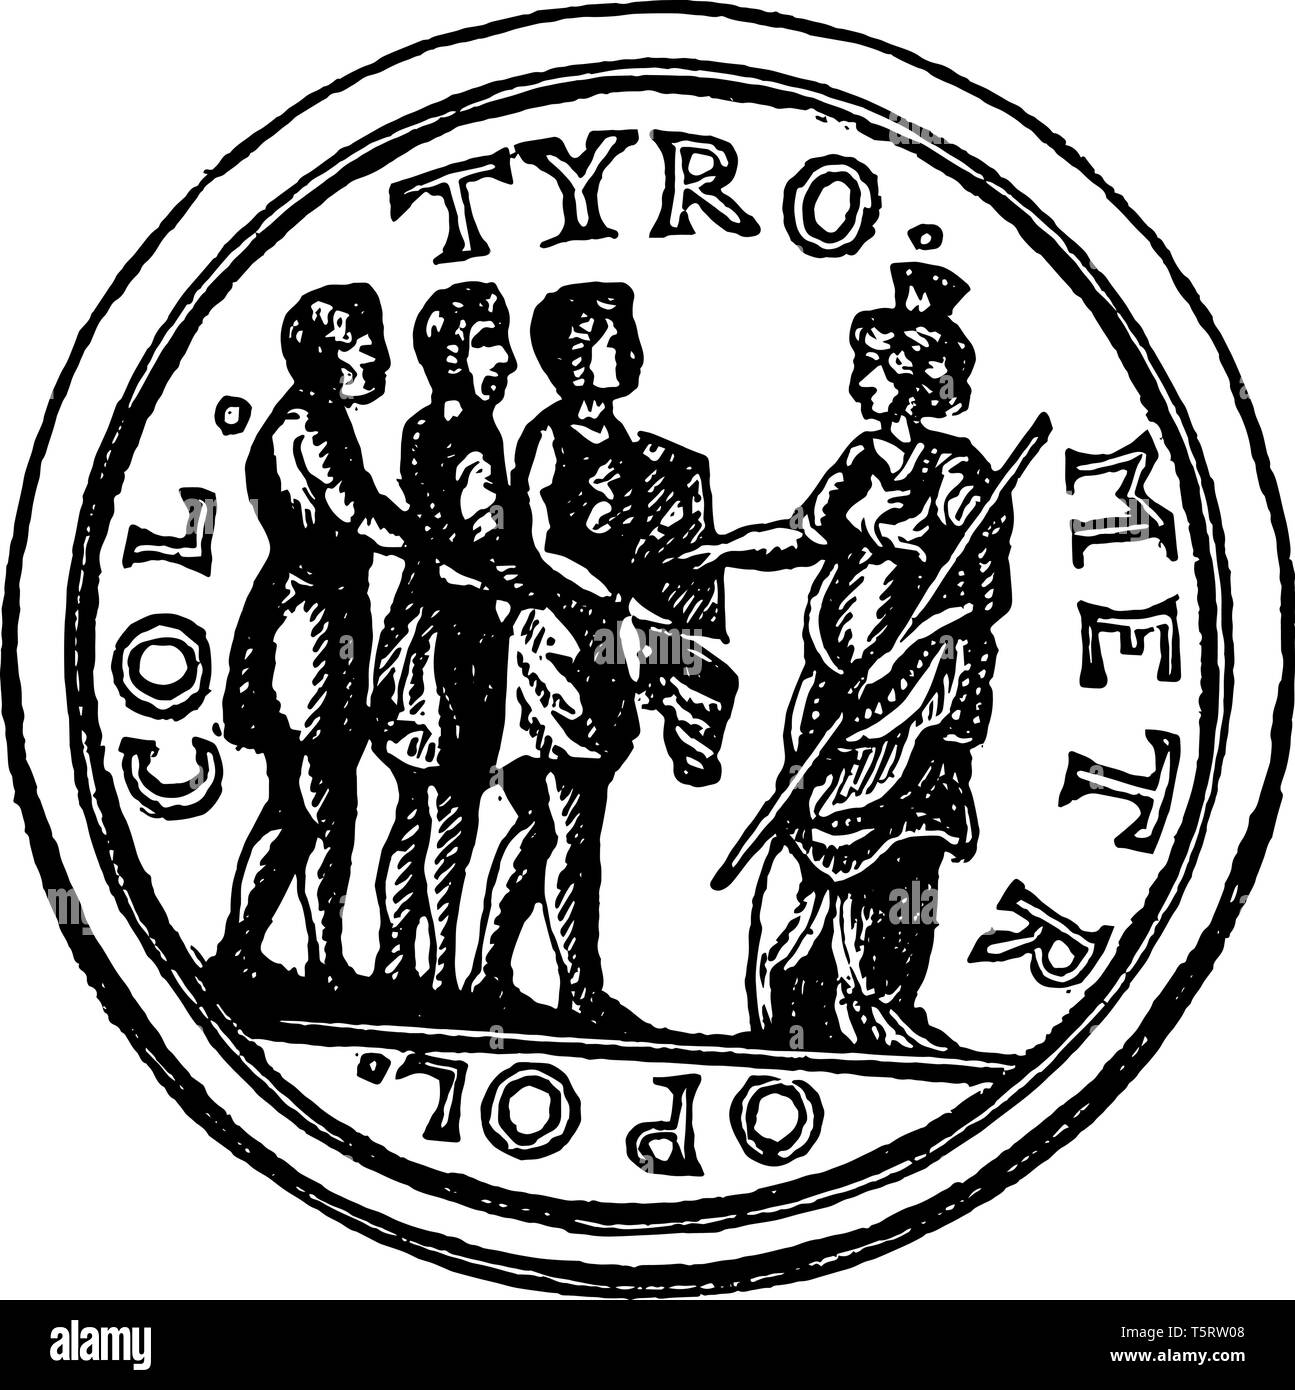 This image shows the tire medal. There are 4 people on the surface of the medal. It seems that a person is giving instructions to 3 other people, vint Stock Vector